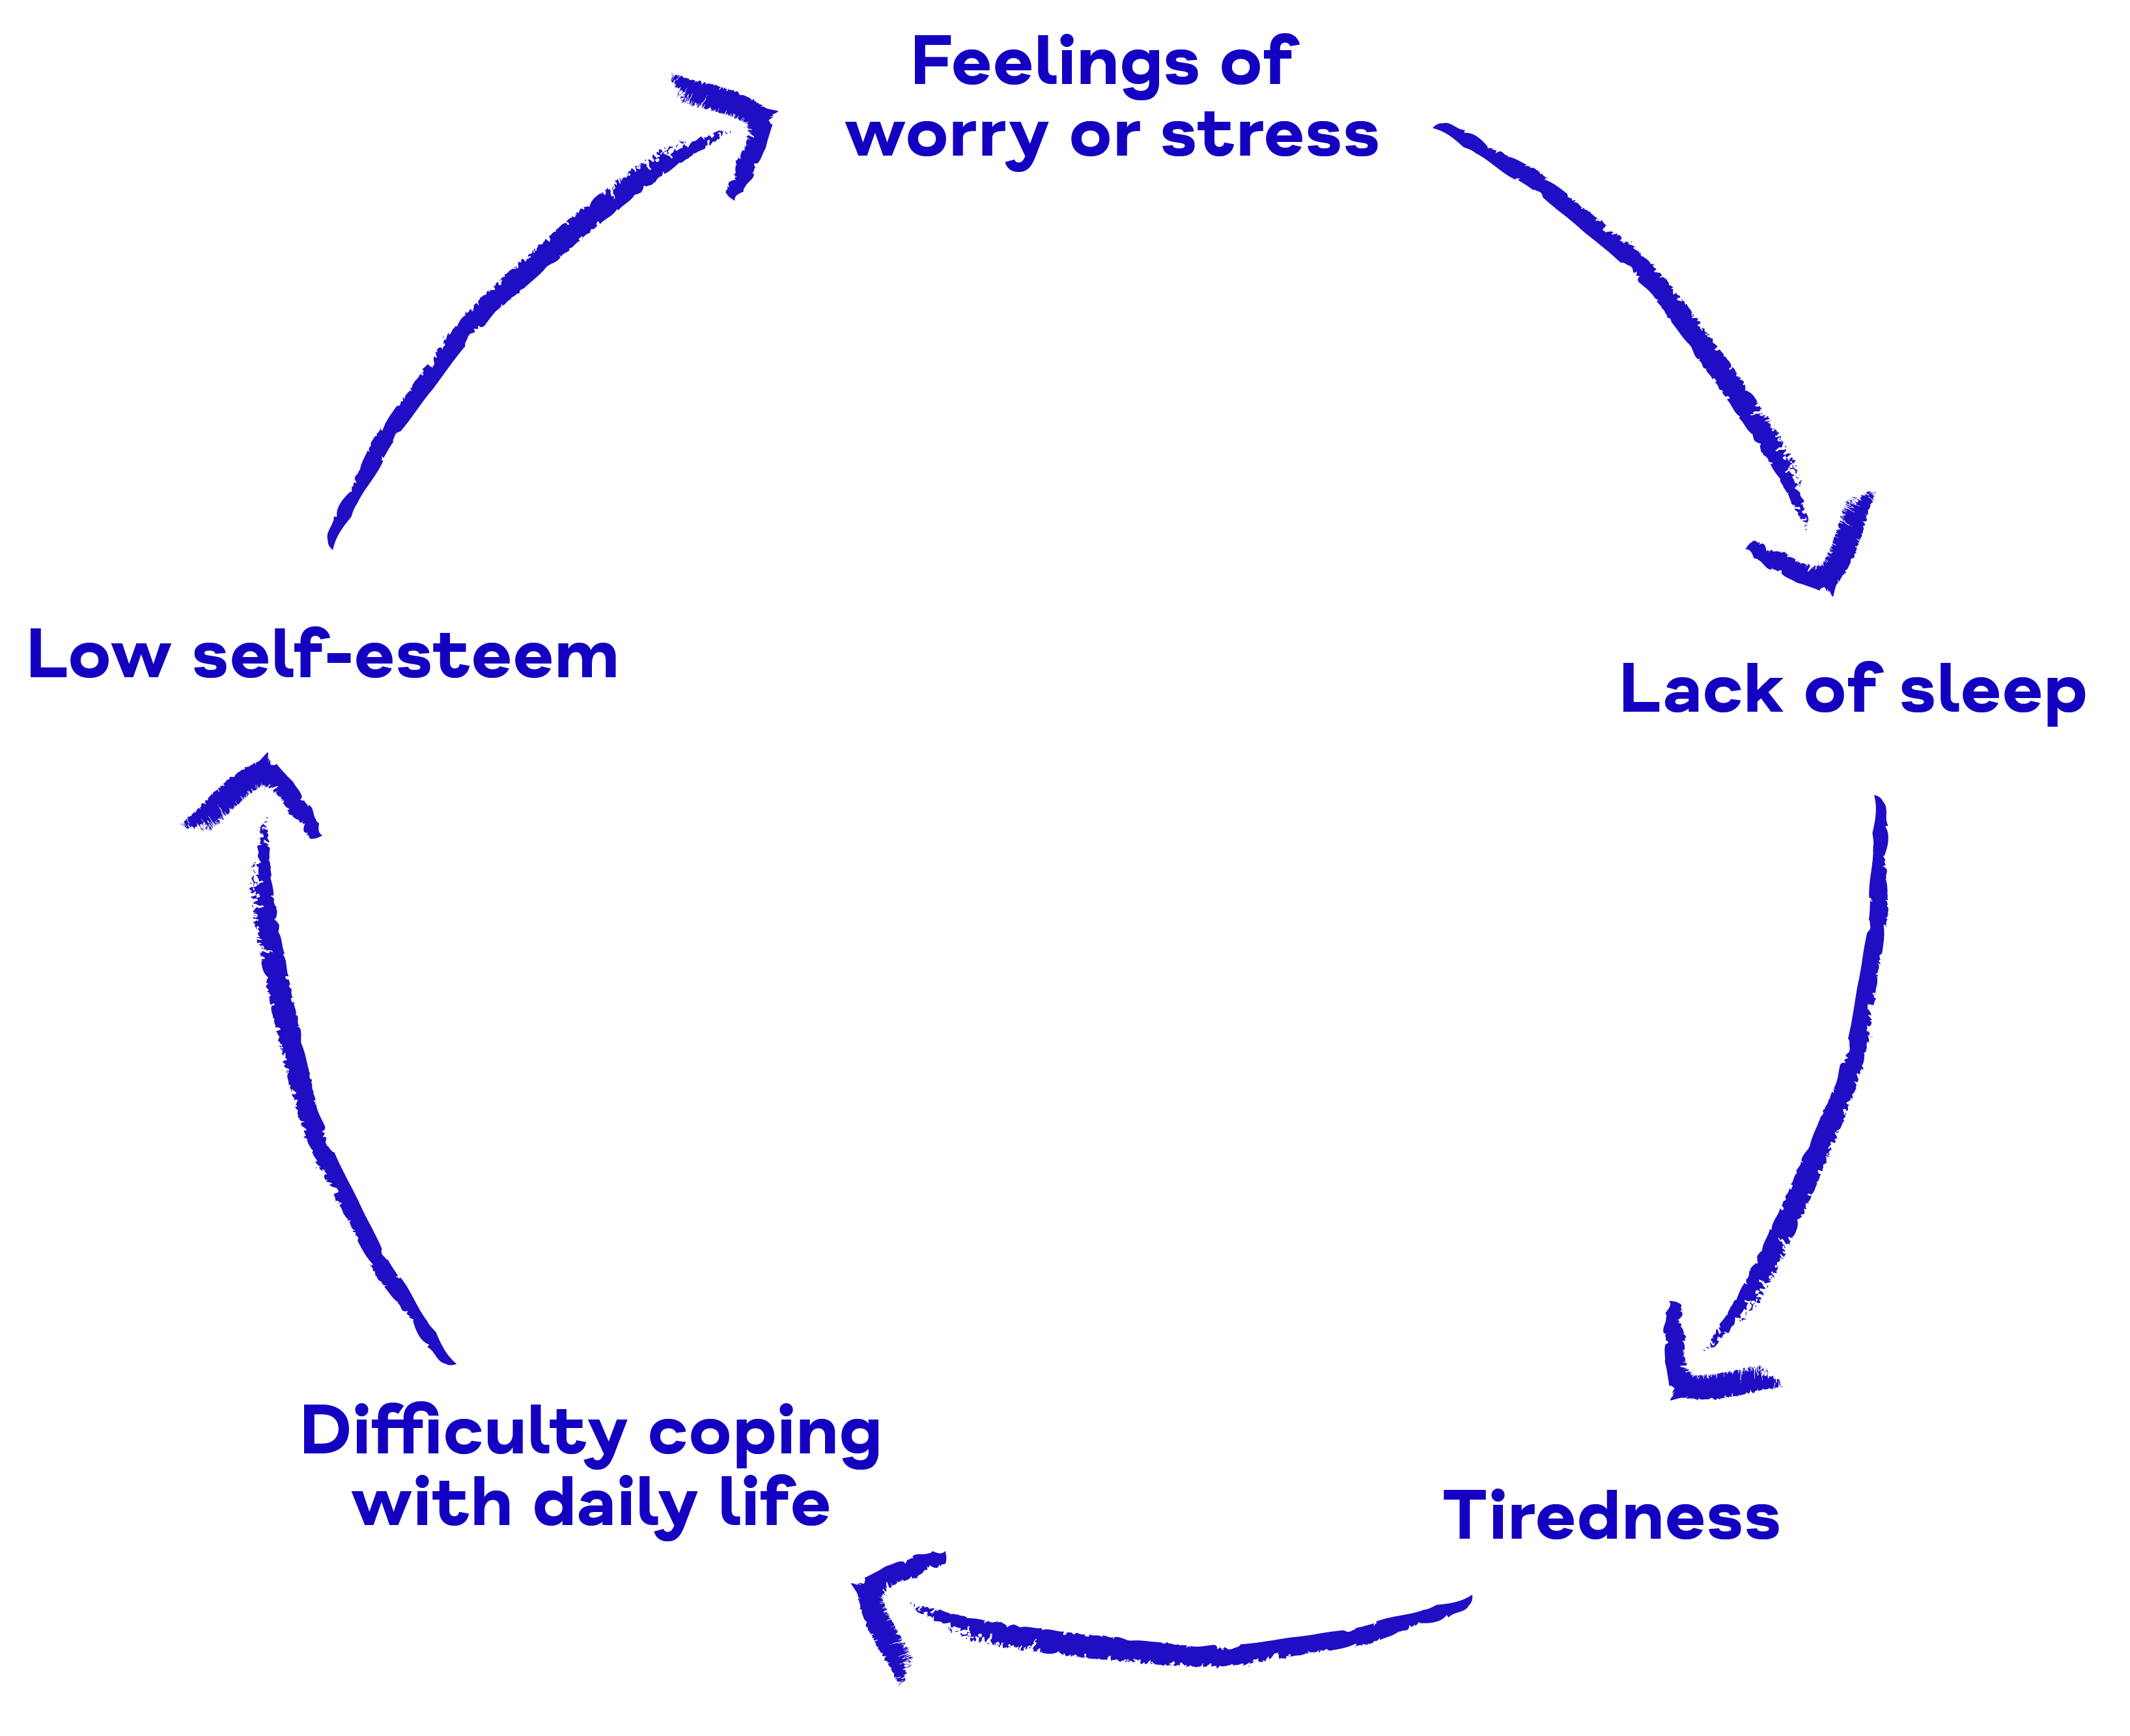 Circular arrows with text explaining five stages in the cycle of sleep problems. The cycle moves from a lack of sleep to tiredness, which leads to difficulty coping with daily life, causing low self esteem which leads to worrying and stress, and these cause a lack of sleep, restarting the cycle.